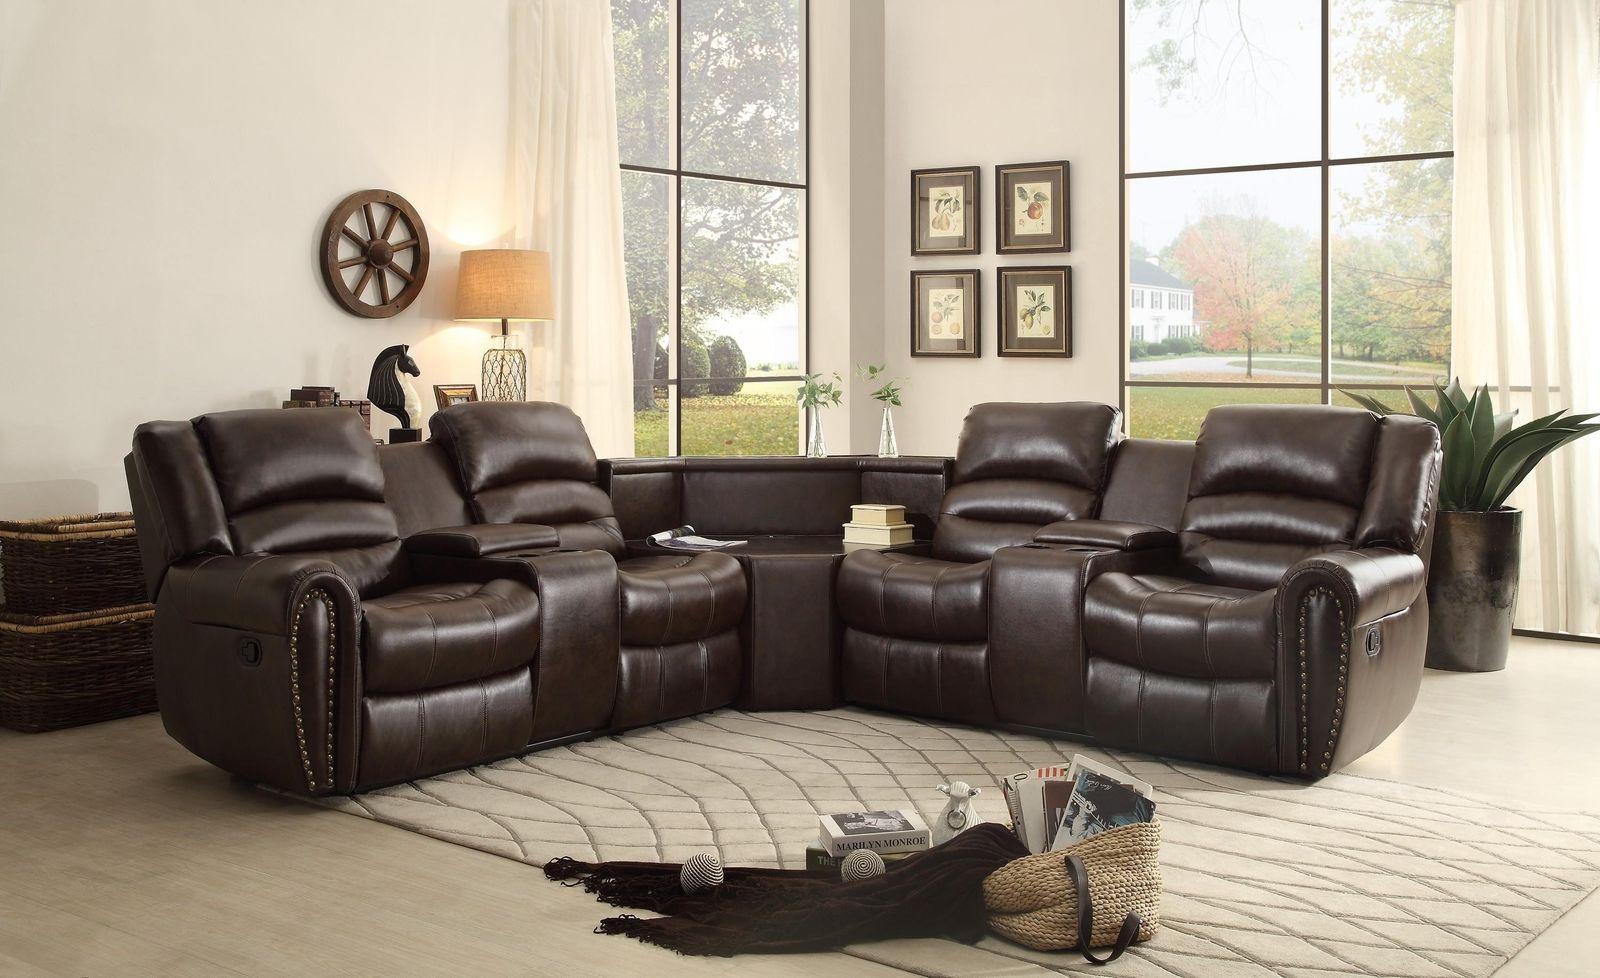 

    
Homelegance Palmyra Brown Bonded Leather Reclining Sectional Sofa Receptacles
